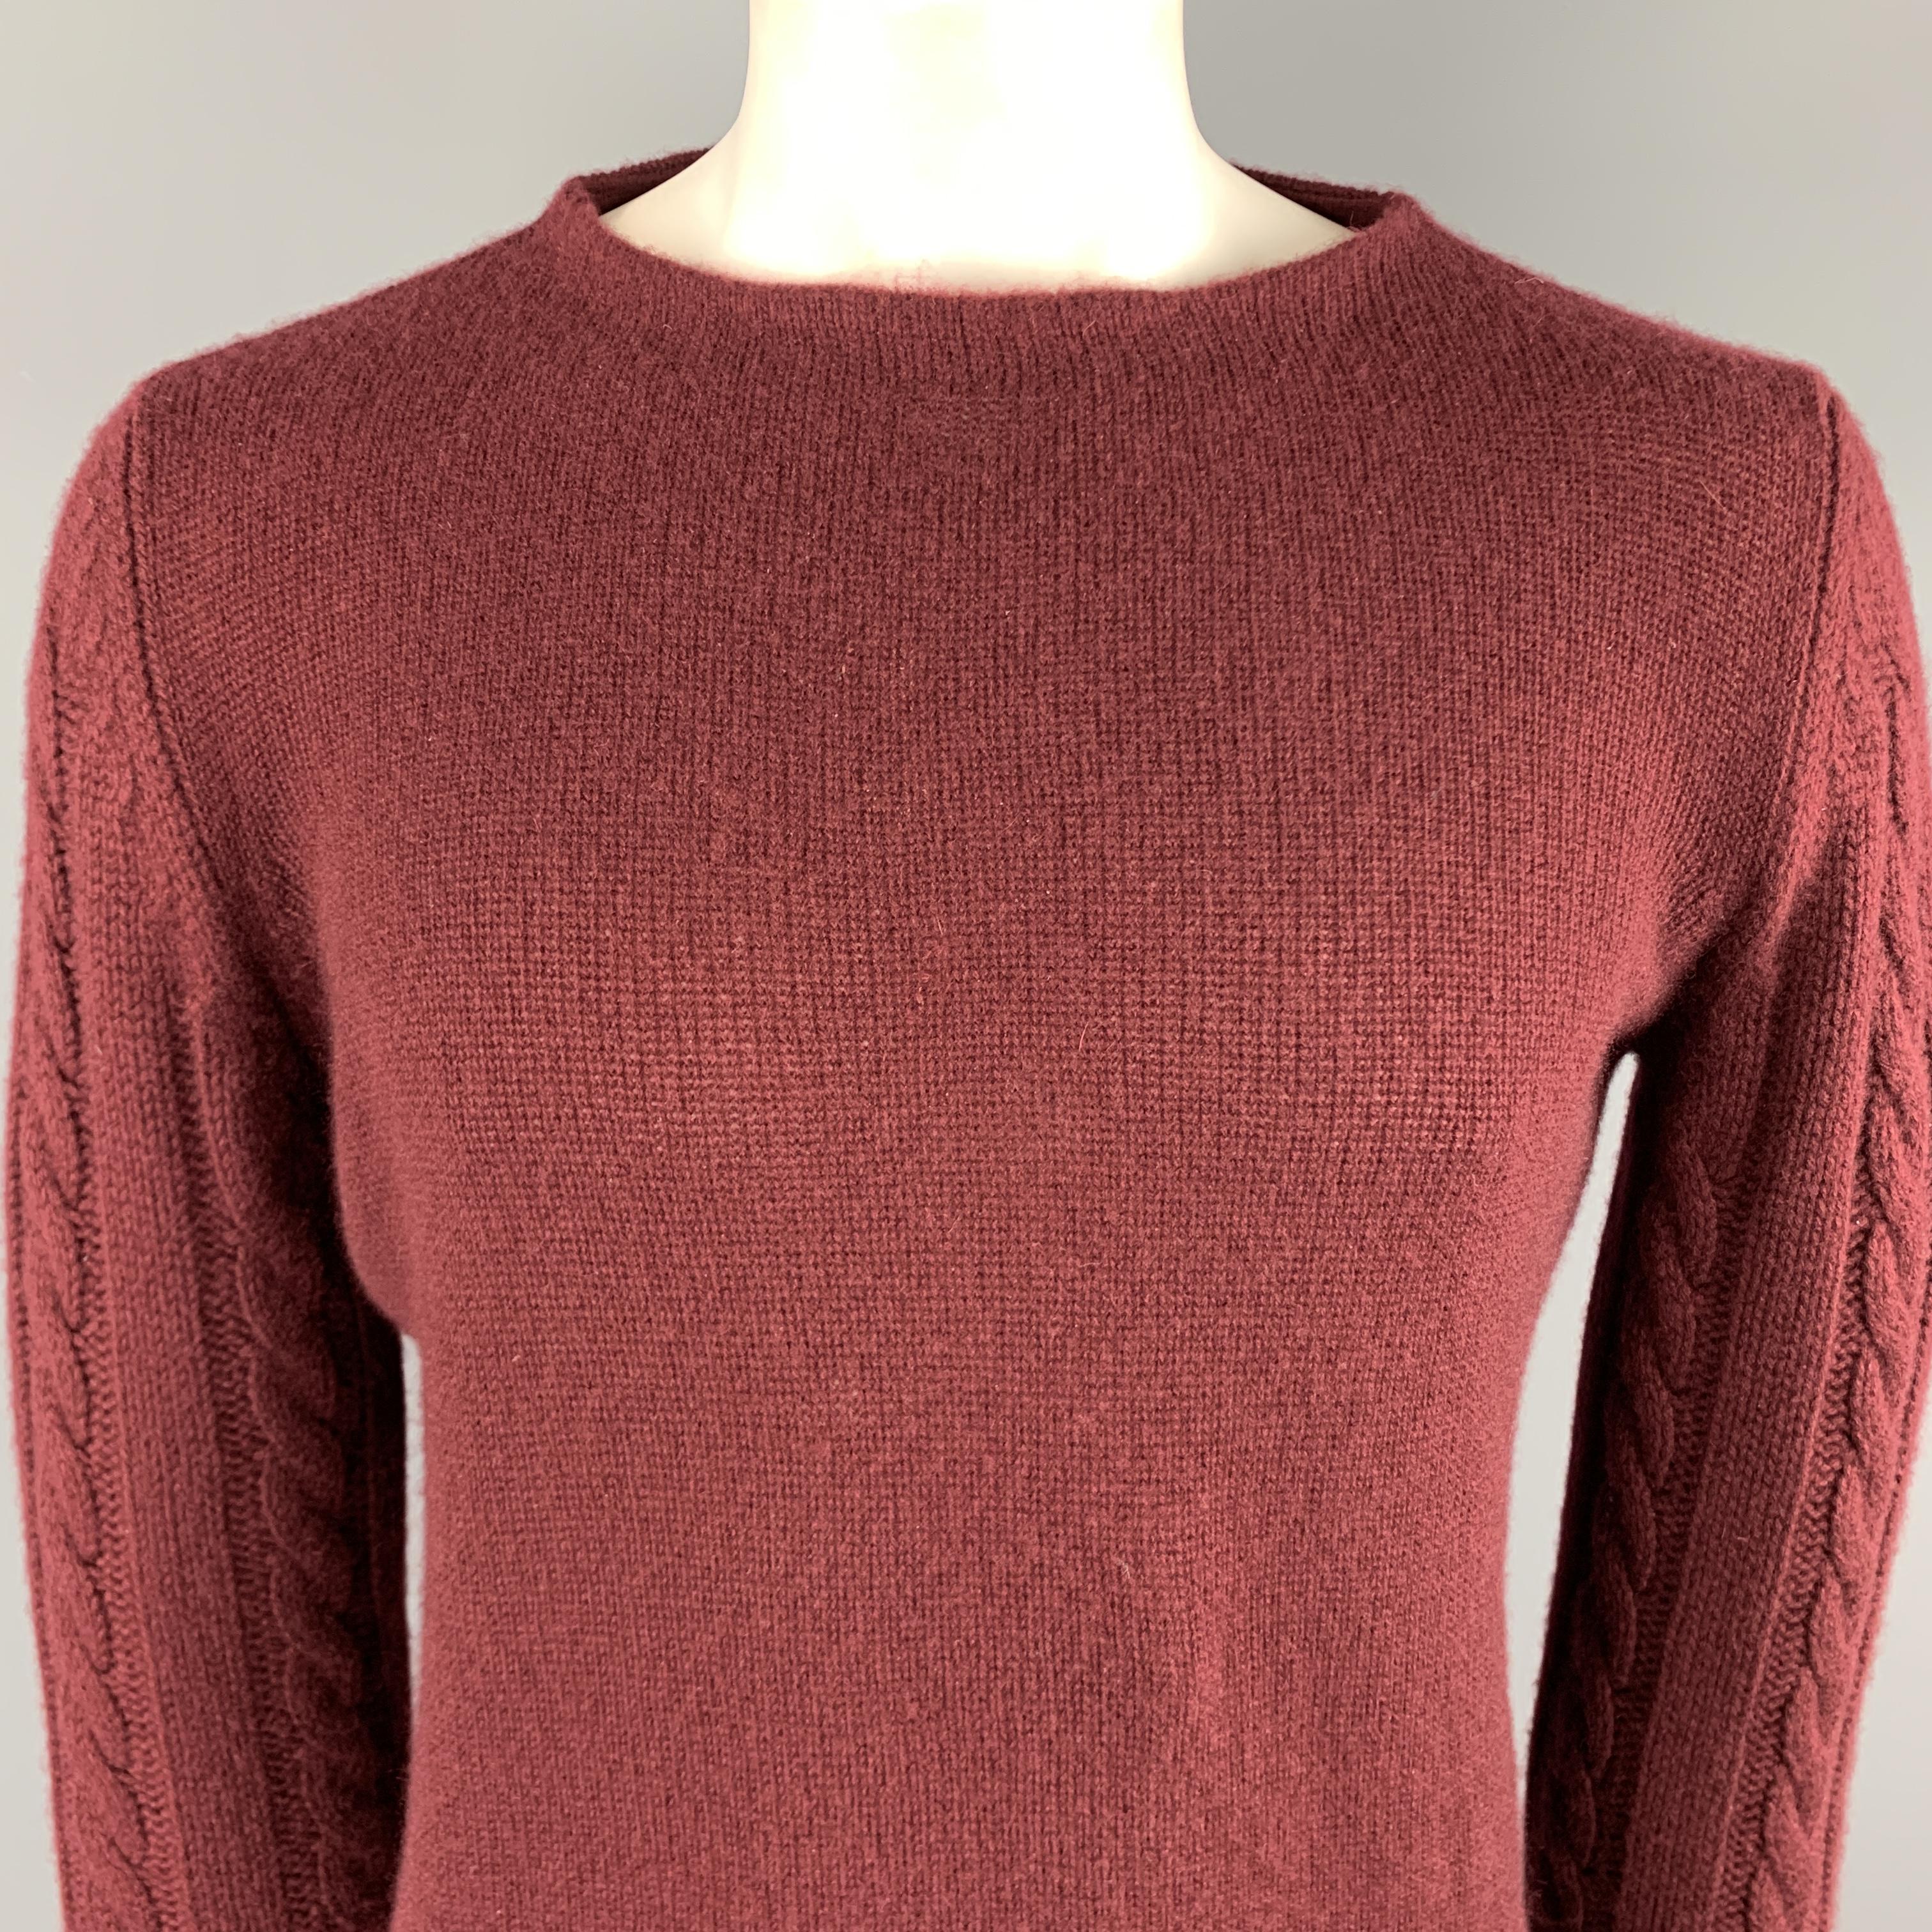 MARNI pullover sweater comes in a burgundy cashmere featuring cable knit sleeves and a boat neck. Made in Italy.

Excellent Pre-Owned Condition.
Marked: IT 52

Measurements:

Shoulder: 18 in. 
Chest: 50 in.
Sleeve: 32 in.
Length: 26 in. 

